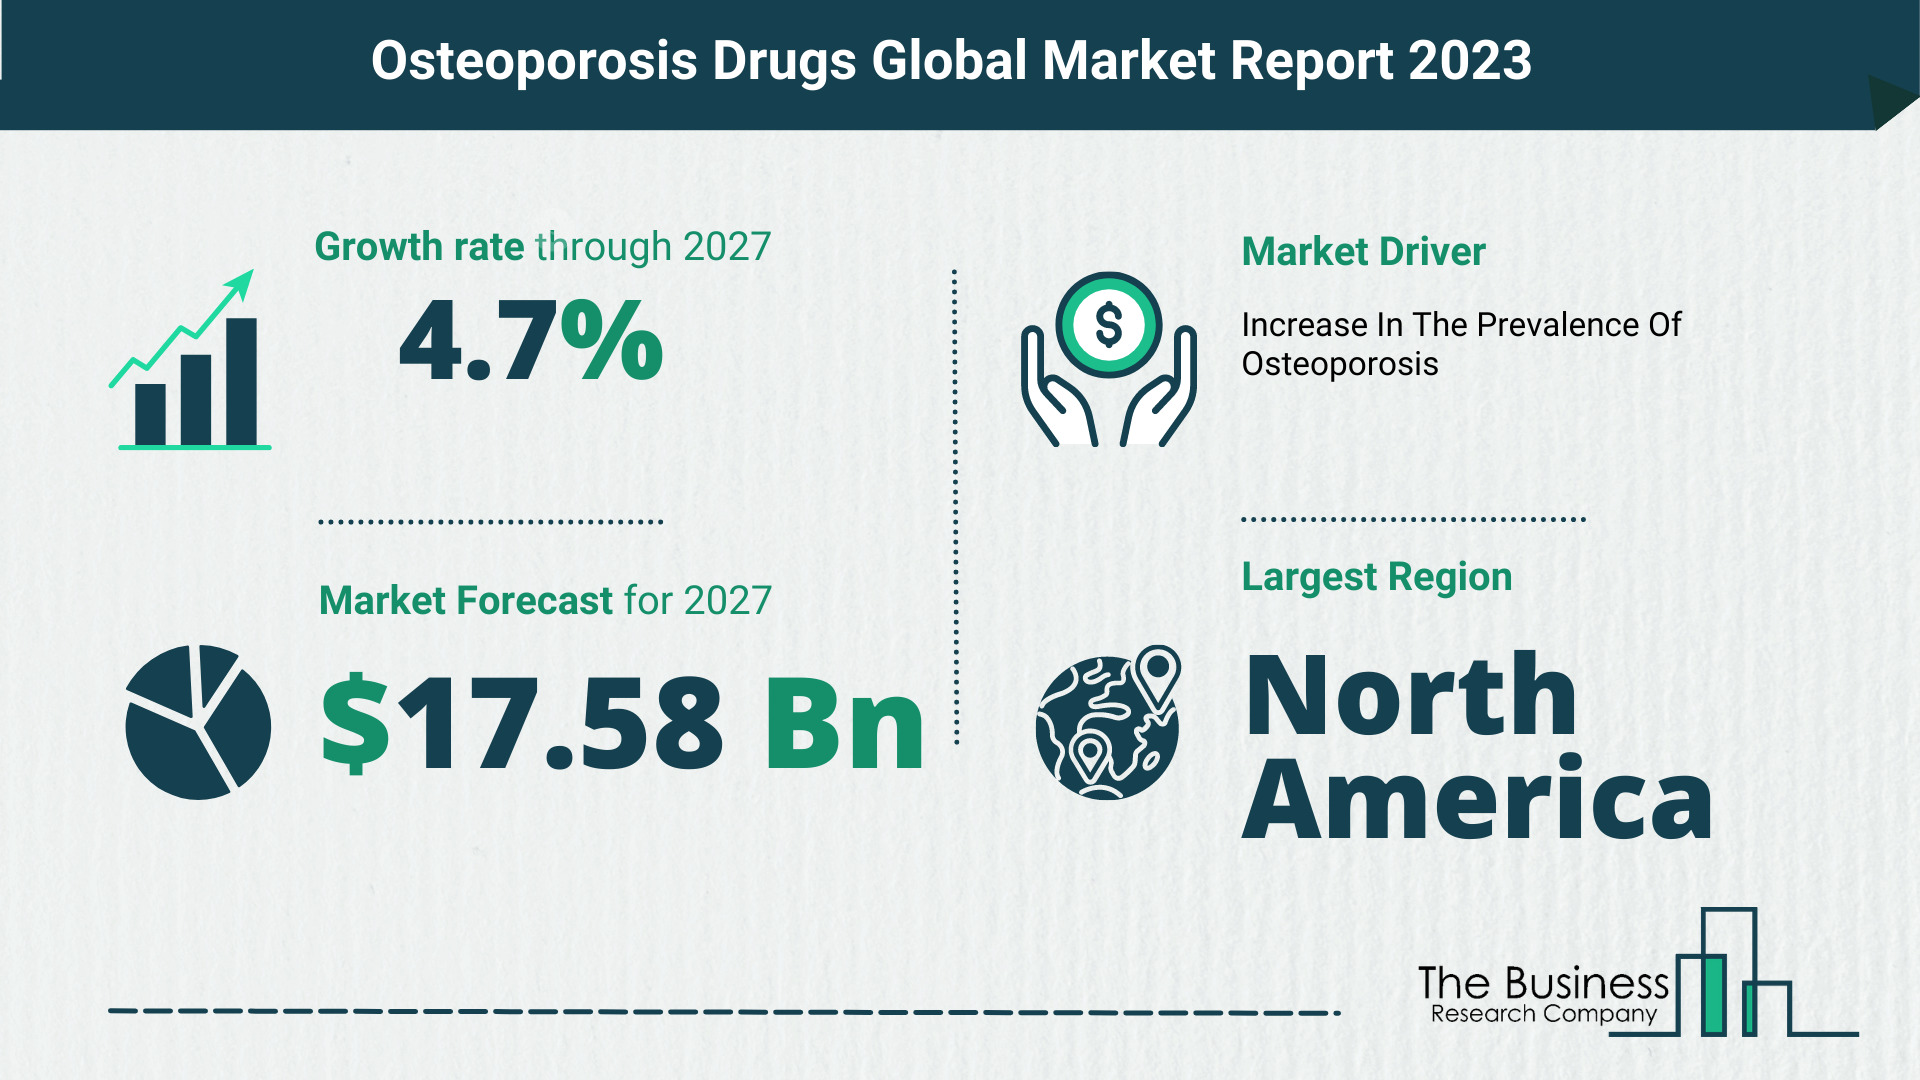 What Will The Osteoporosis Drugs Market Look Like In 2023?